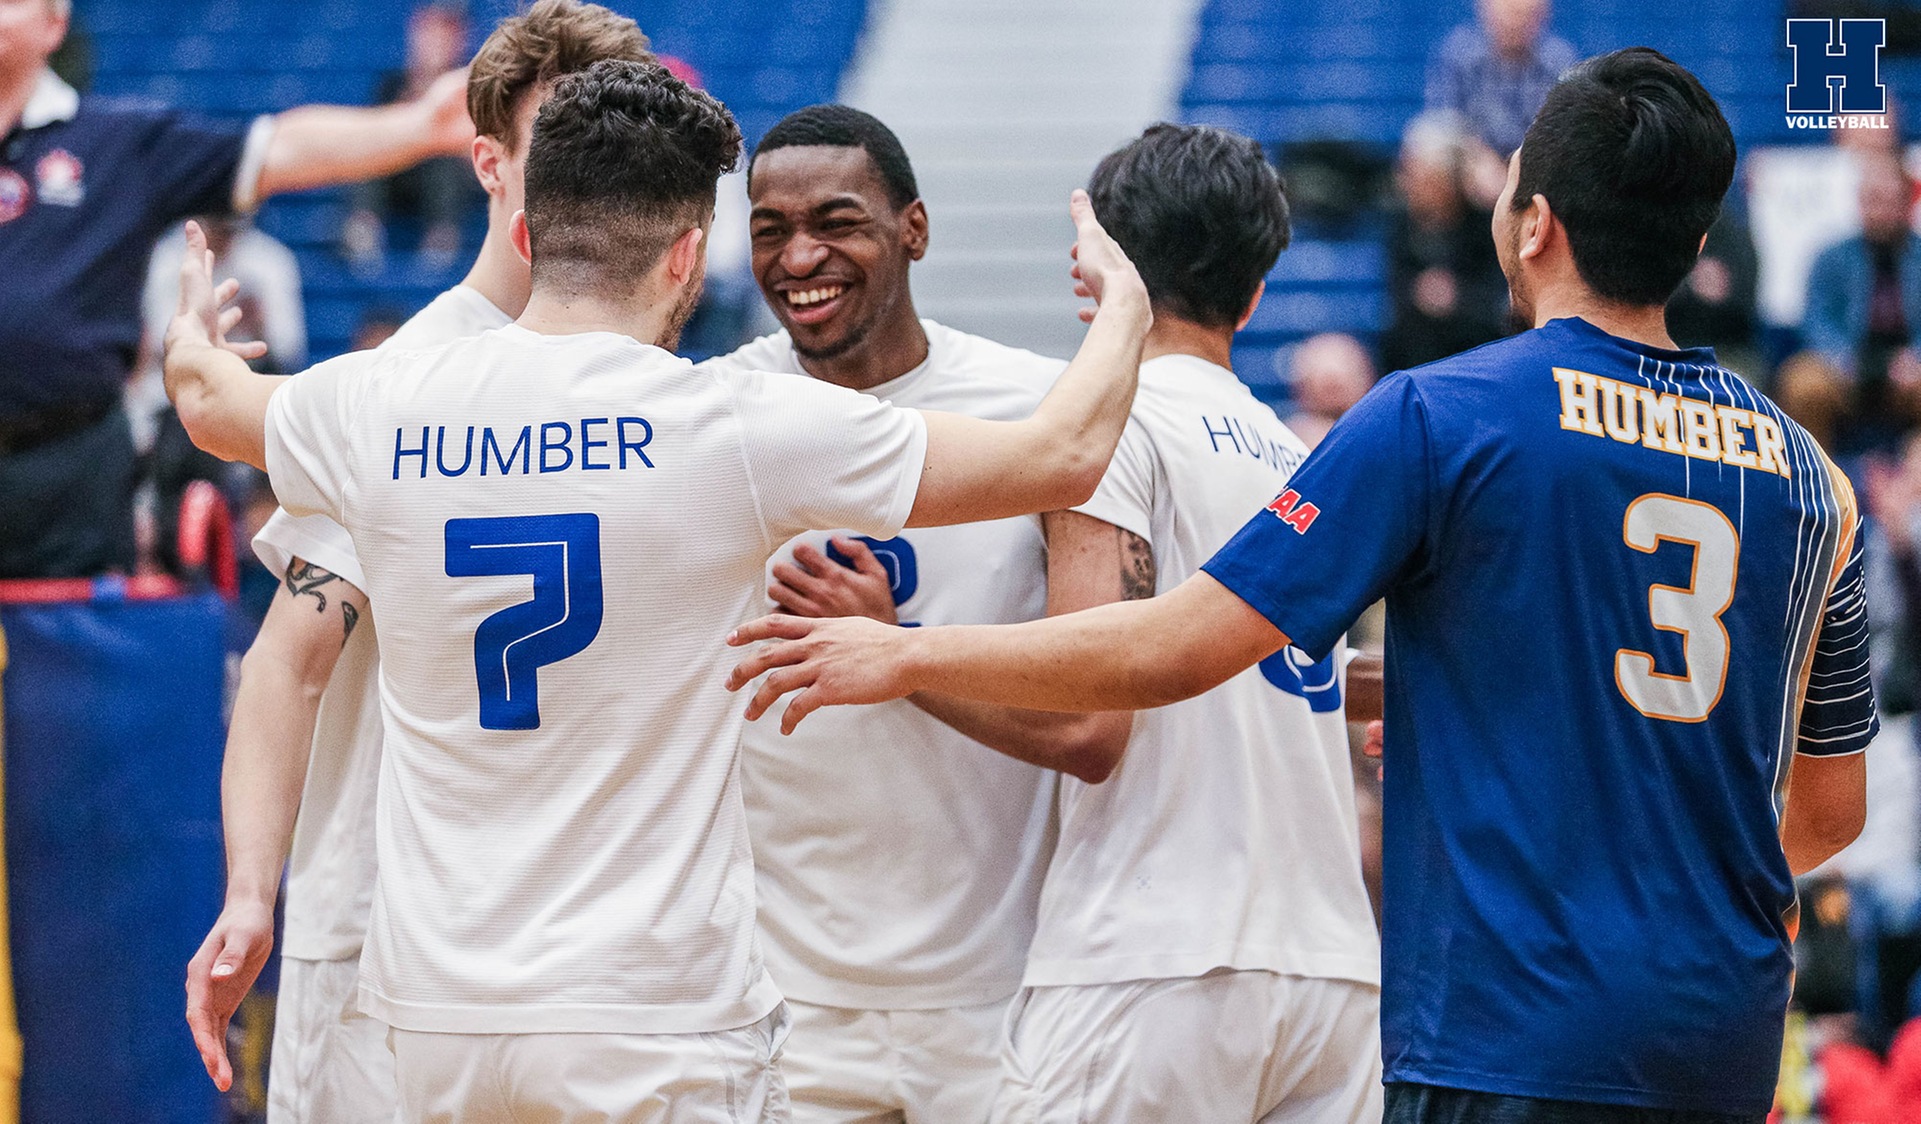 Top-Ranked Men's Volleyball Sweeps Georgian, Books Ticket to Nationals